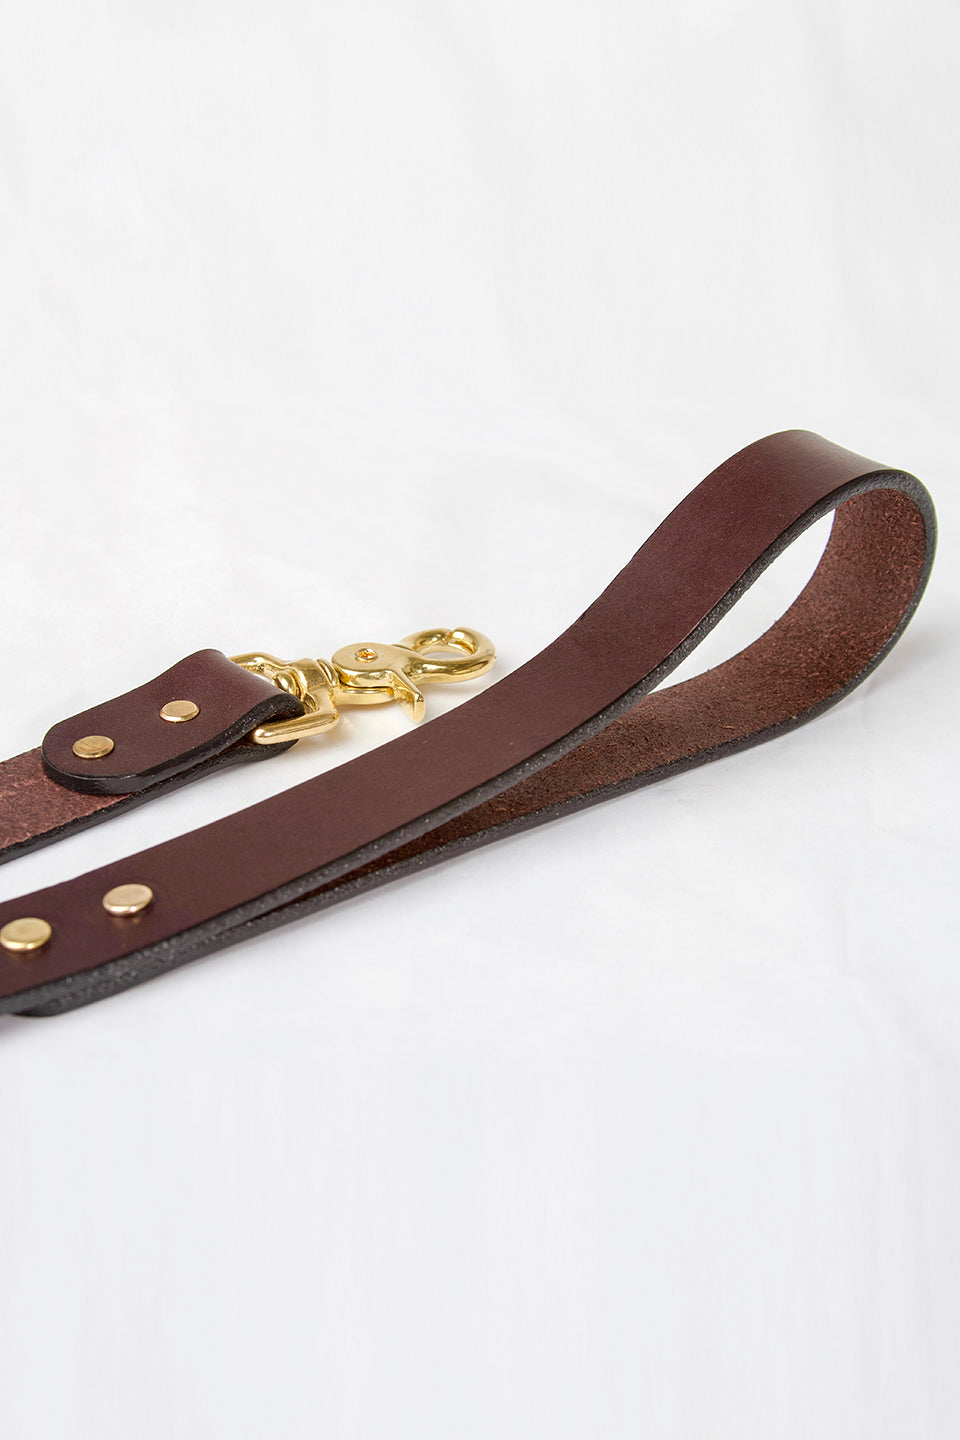 Leather Leash by RW Coolidge